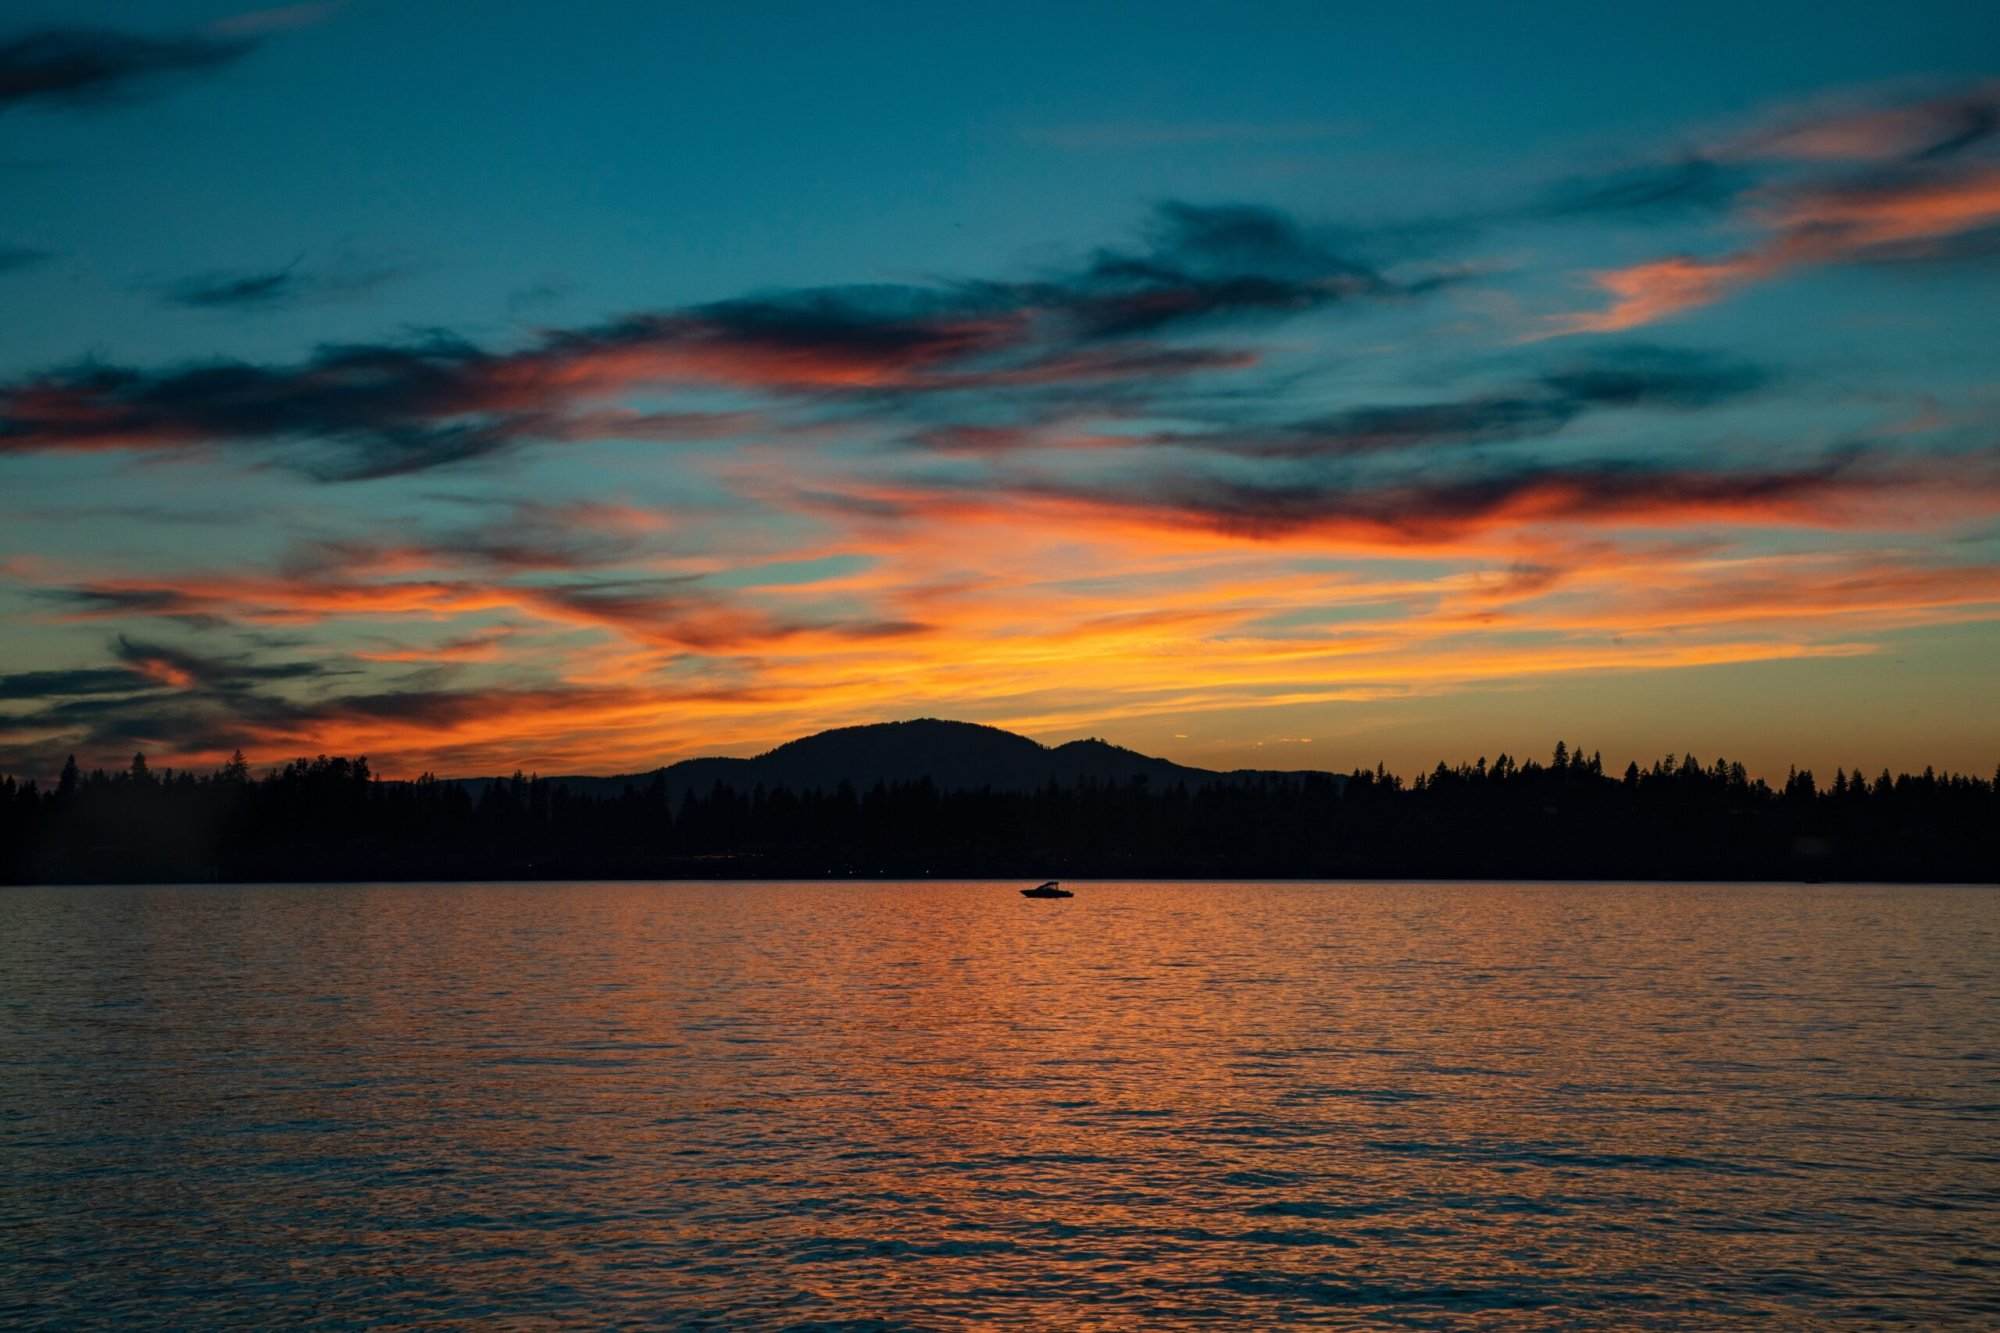 A sunset over a lake with a mountain in the background.